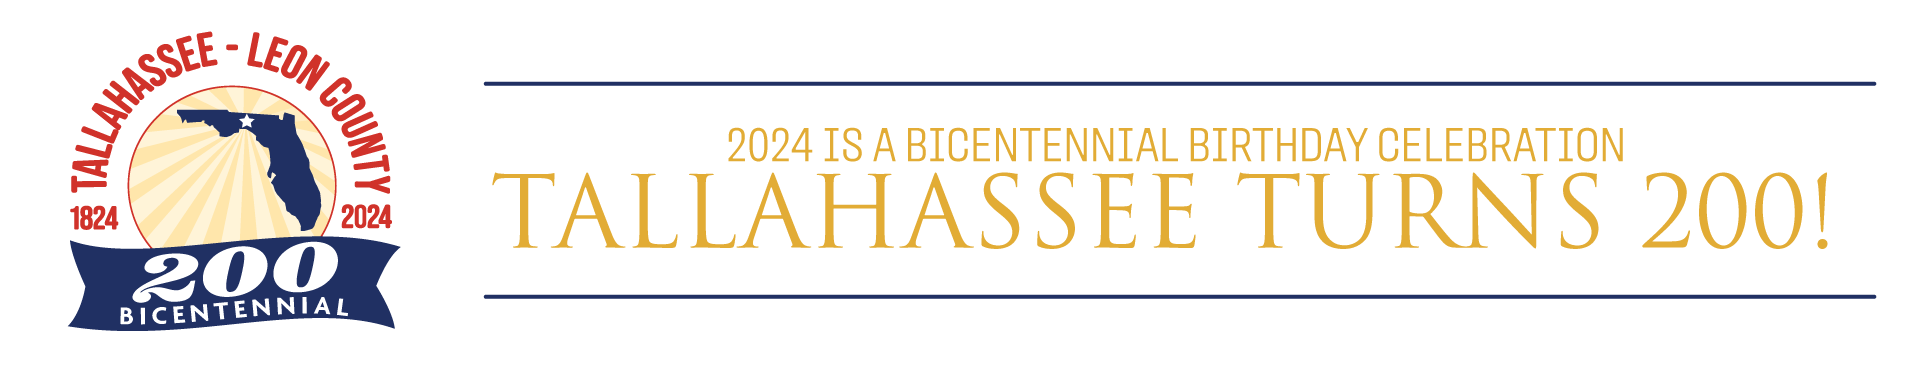 Celebrate 200 years of Tallahassee